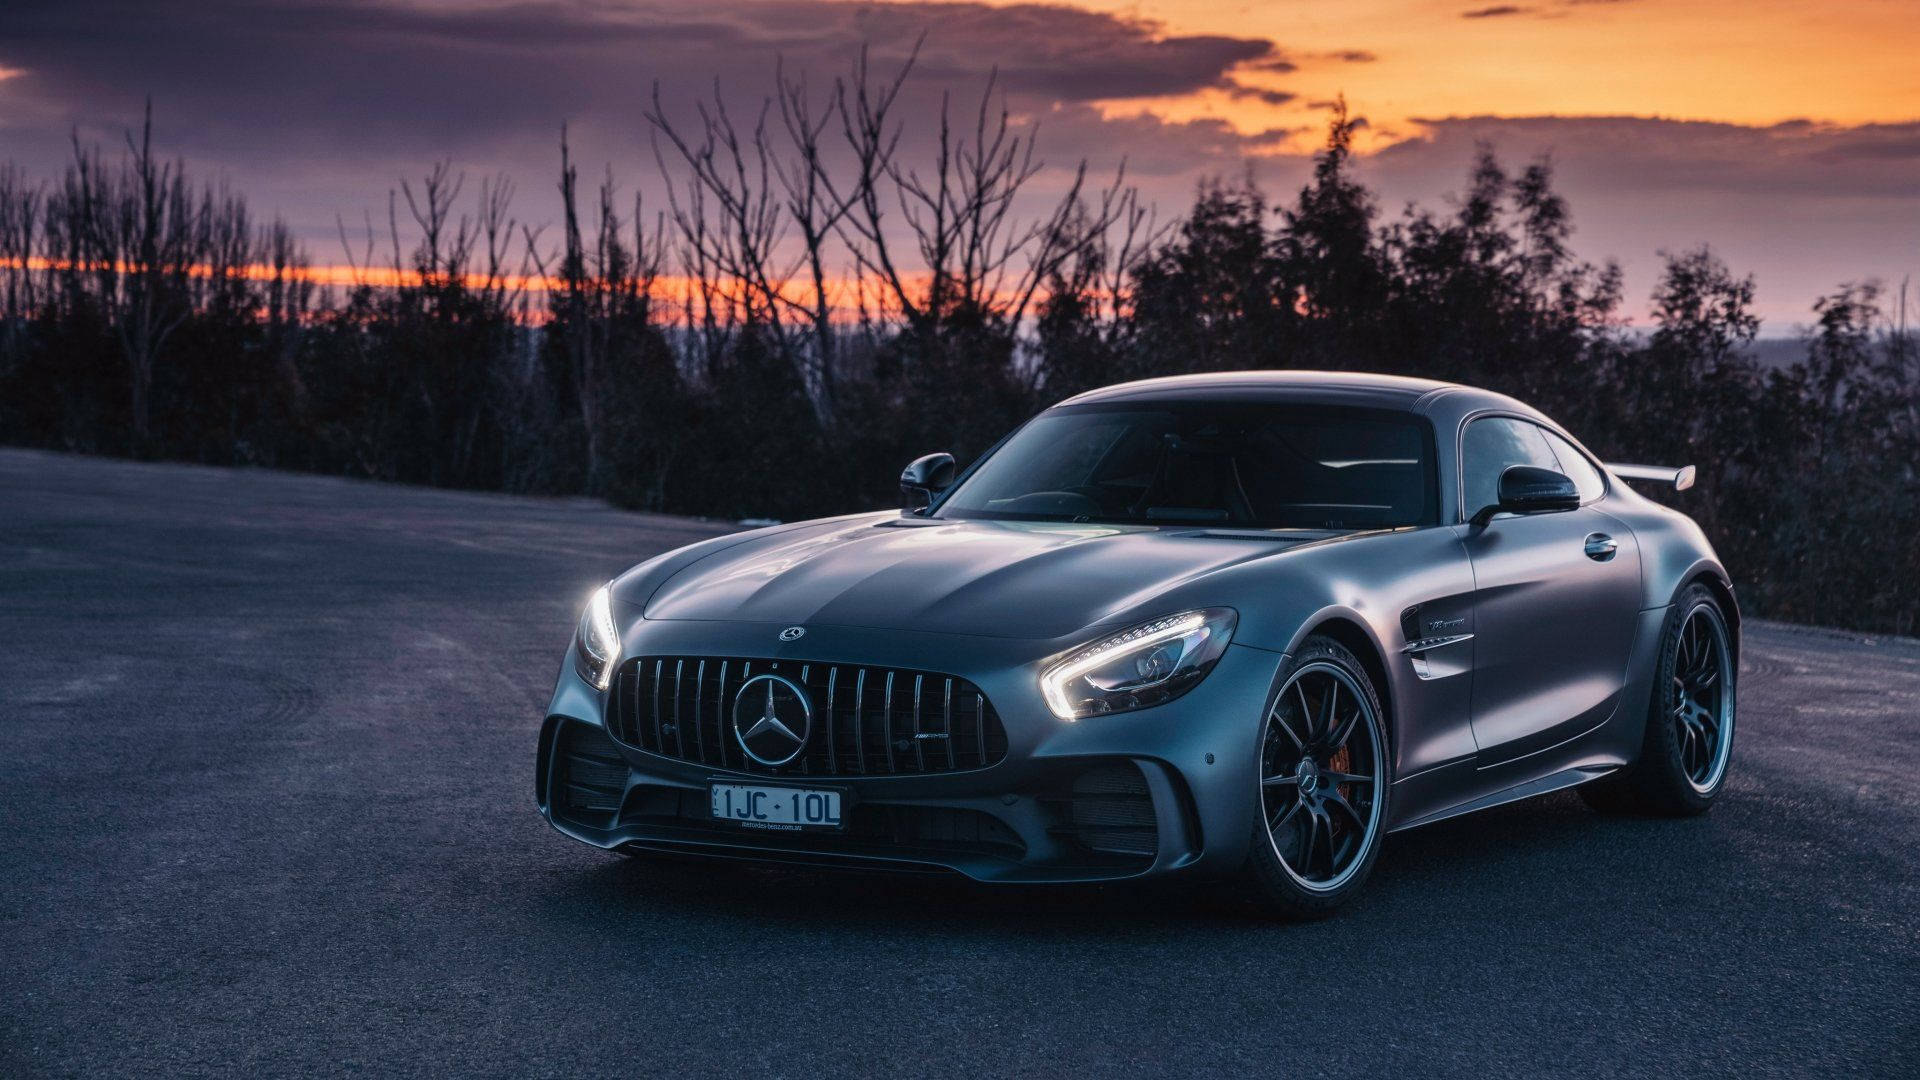 Experience the raw power of the Mercedes Benz AMG Wallpaper